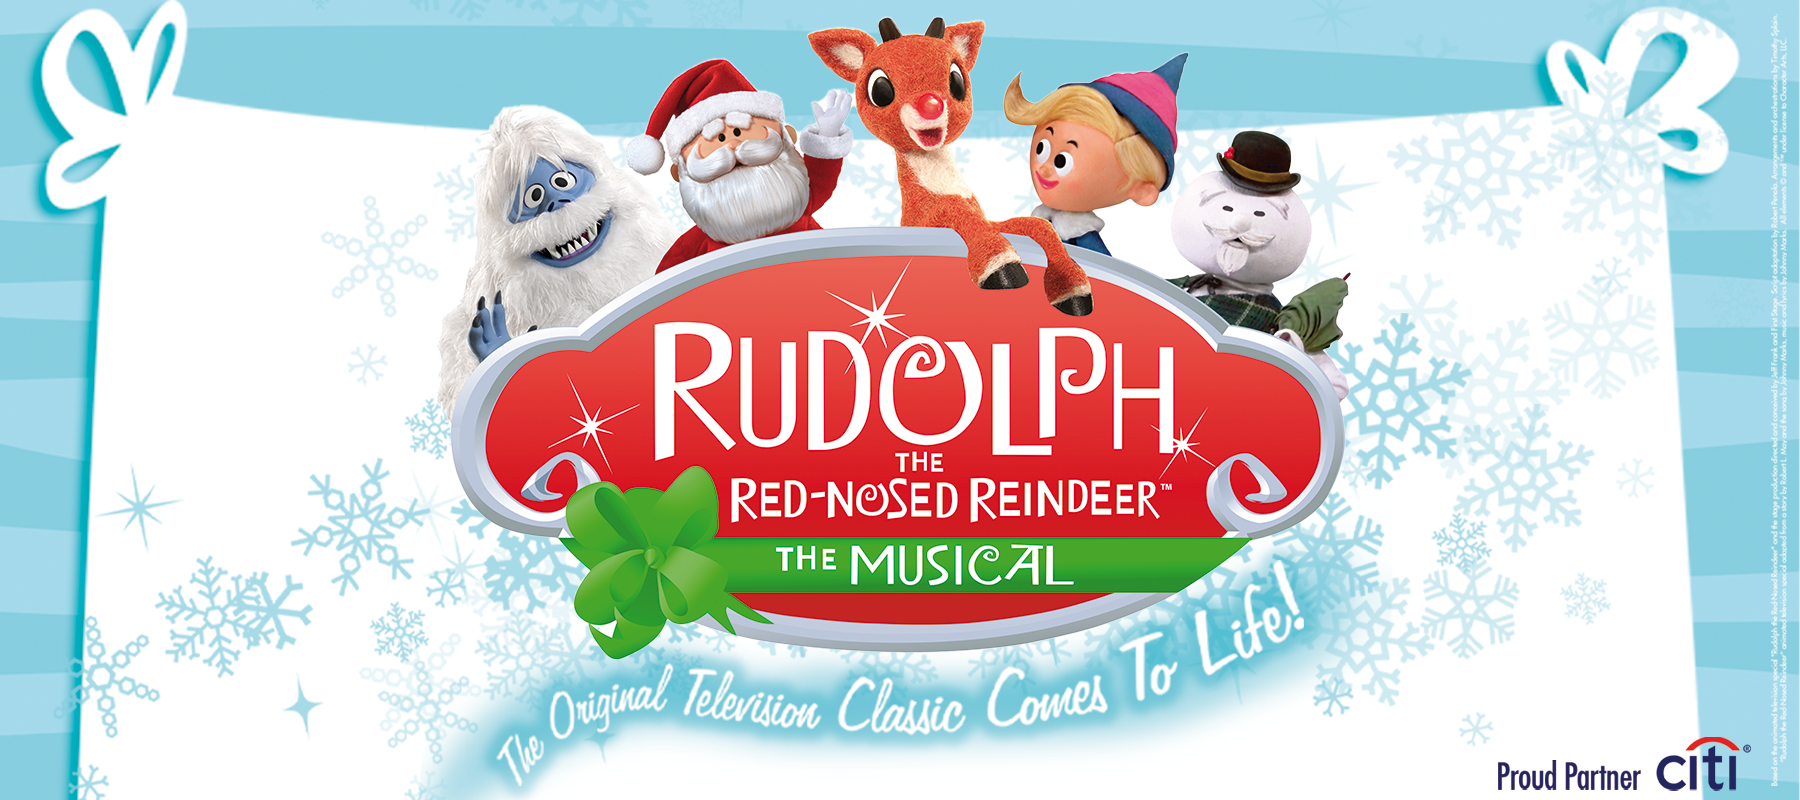 Rudolph The Red-Nosed Reindeer - The Musical